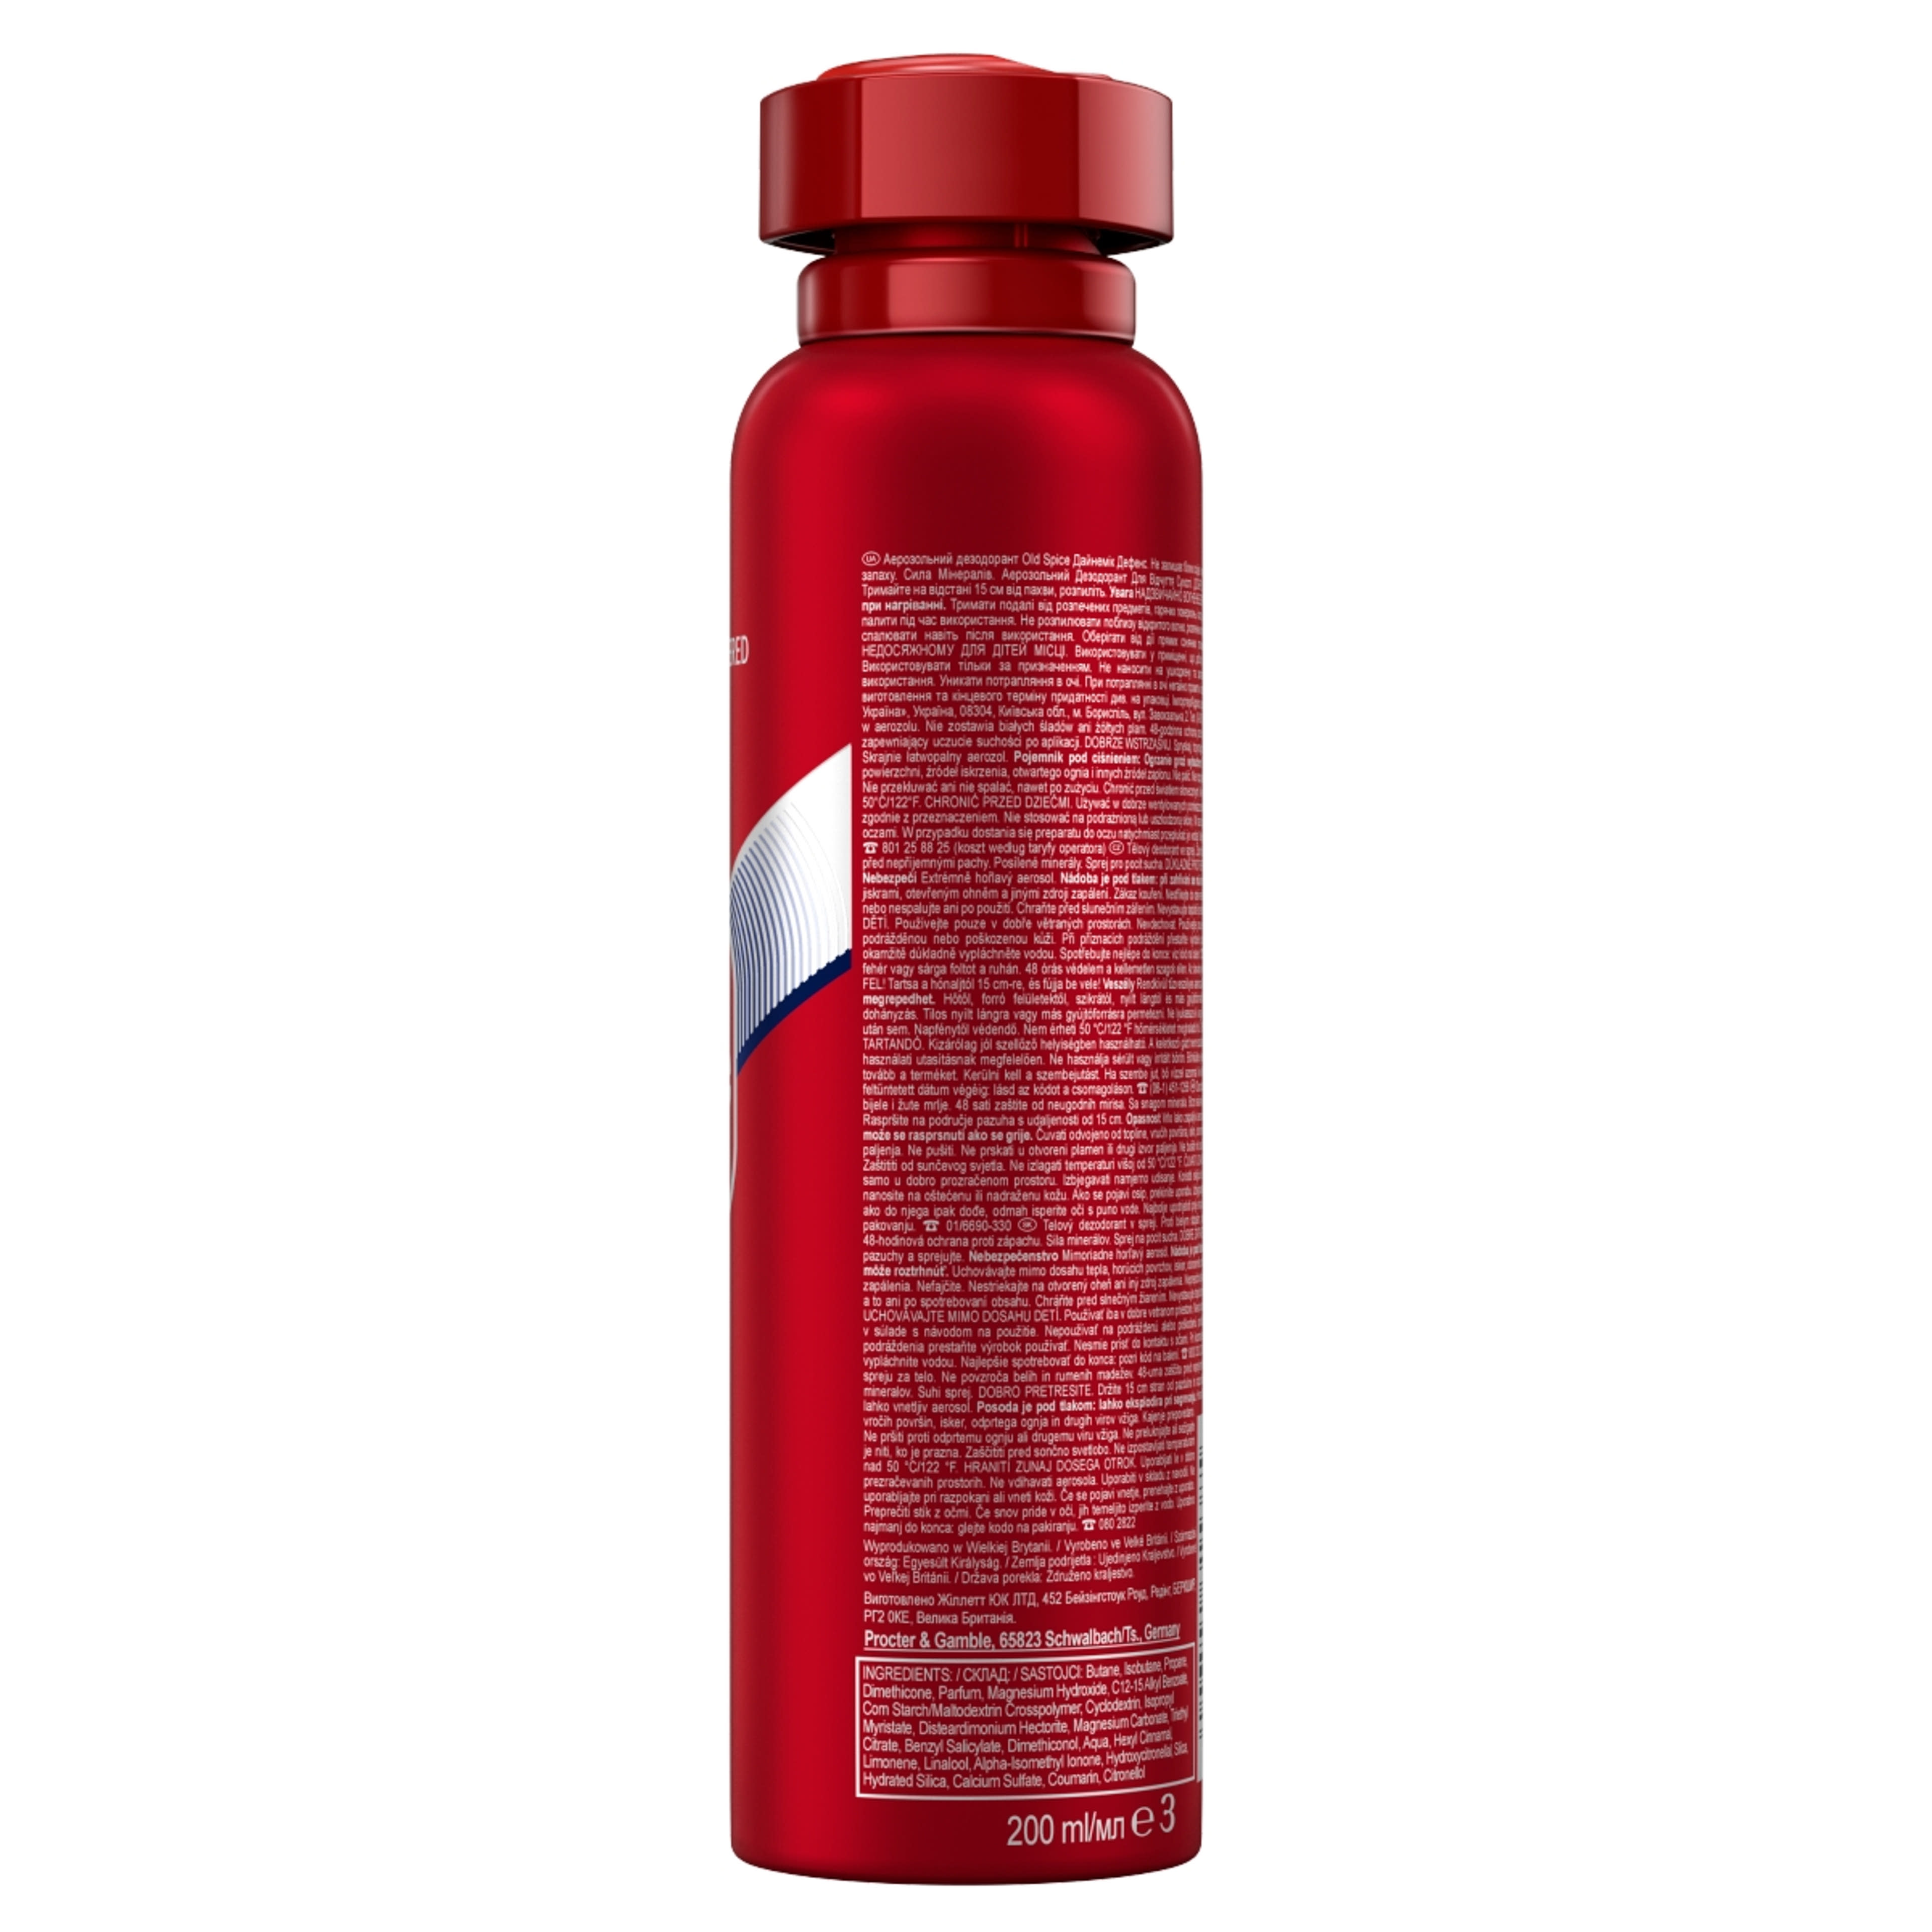 Old Spice Dynamic Defence deo spray - 200 ml-2